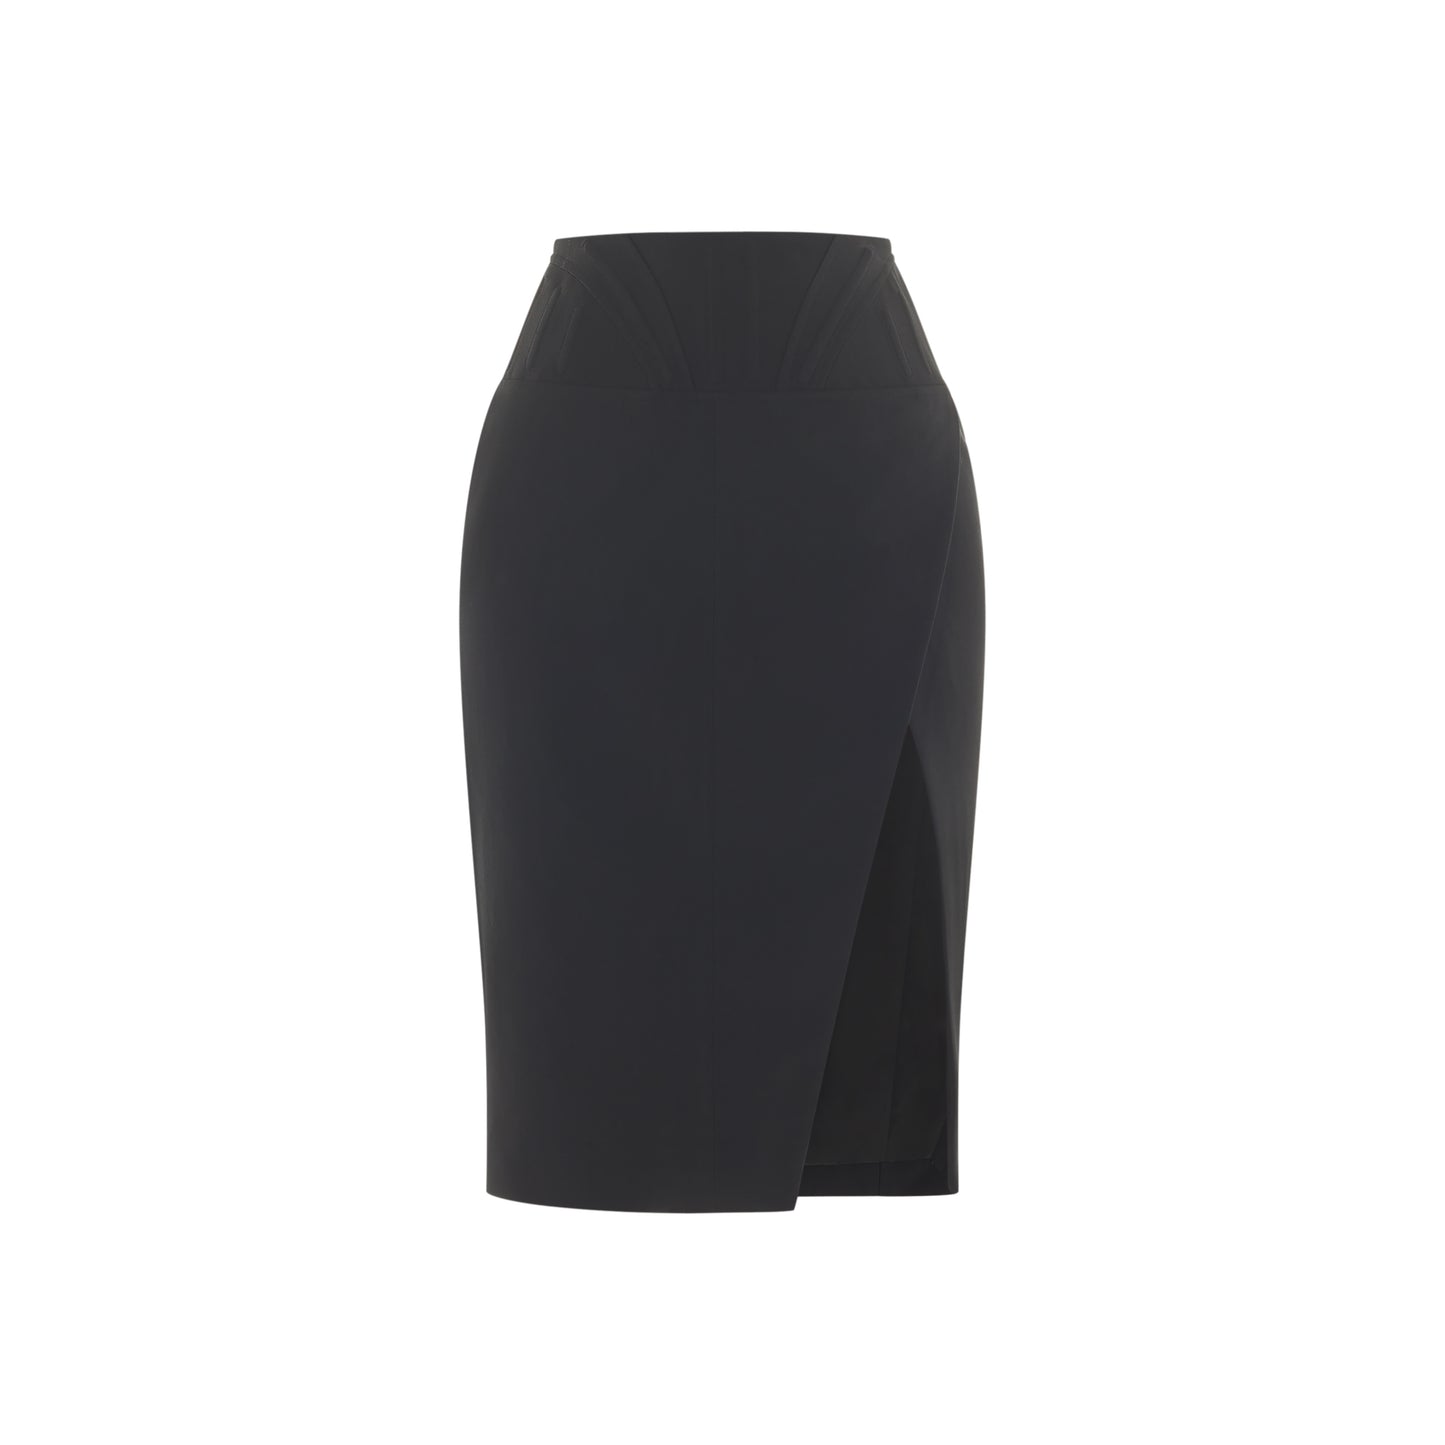 Corseted pencil skirt